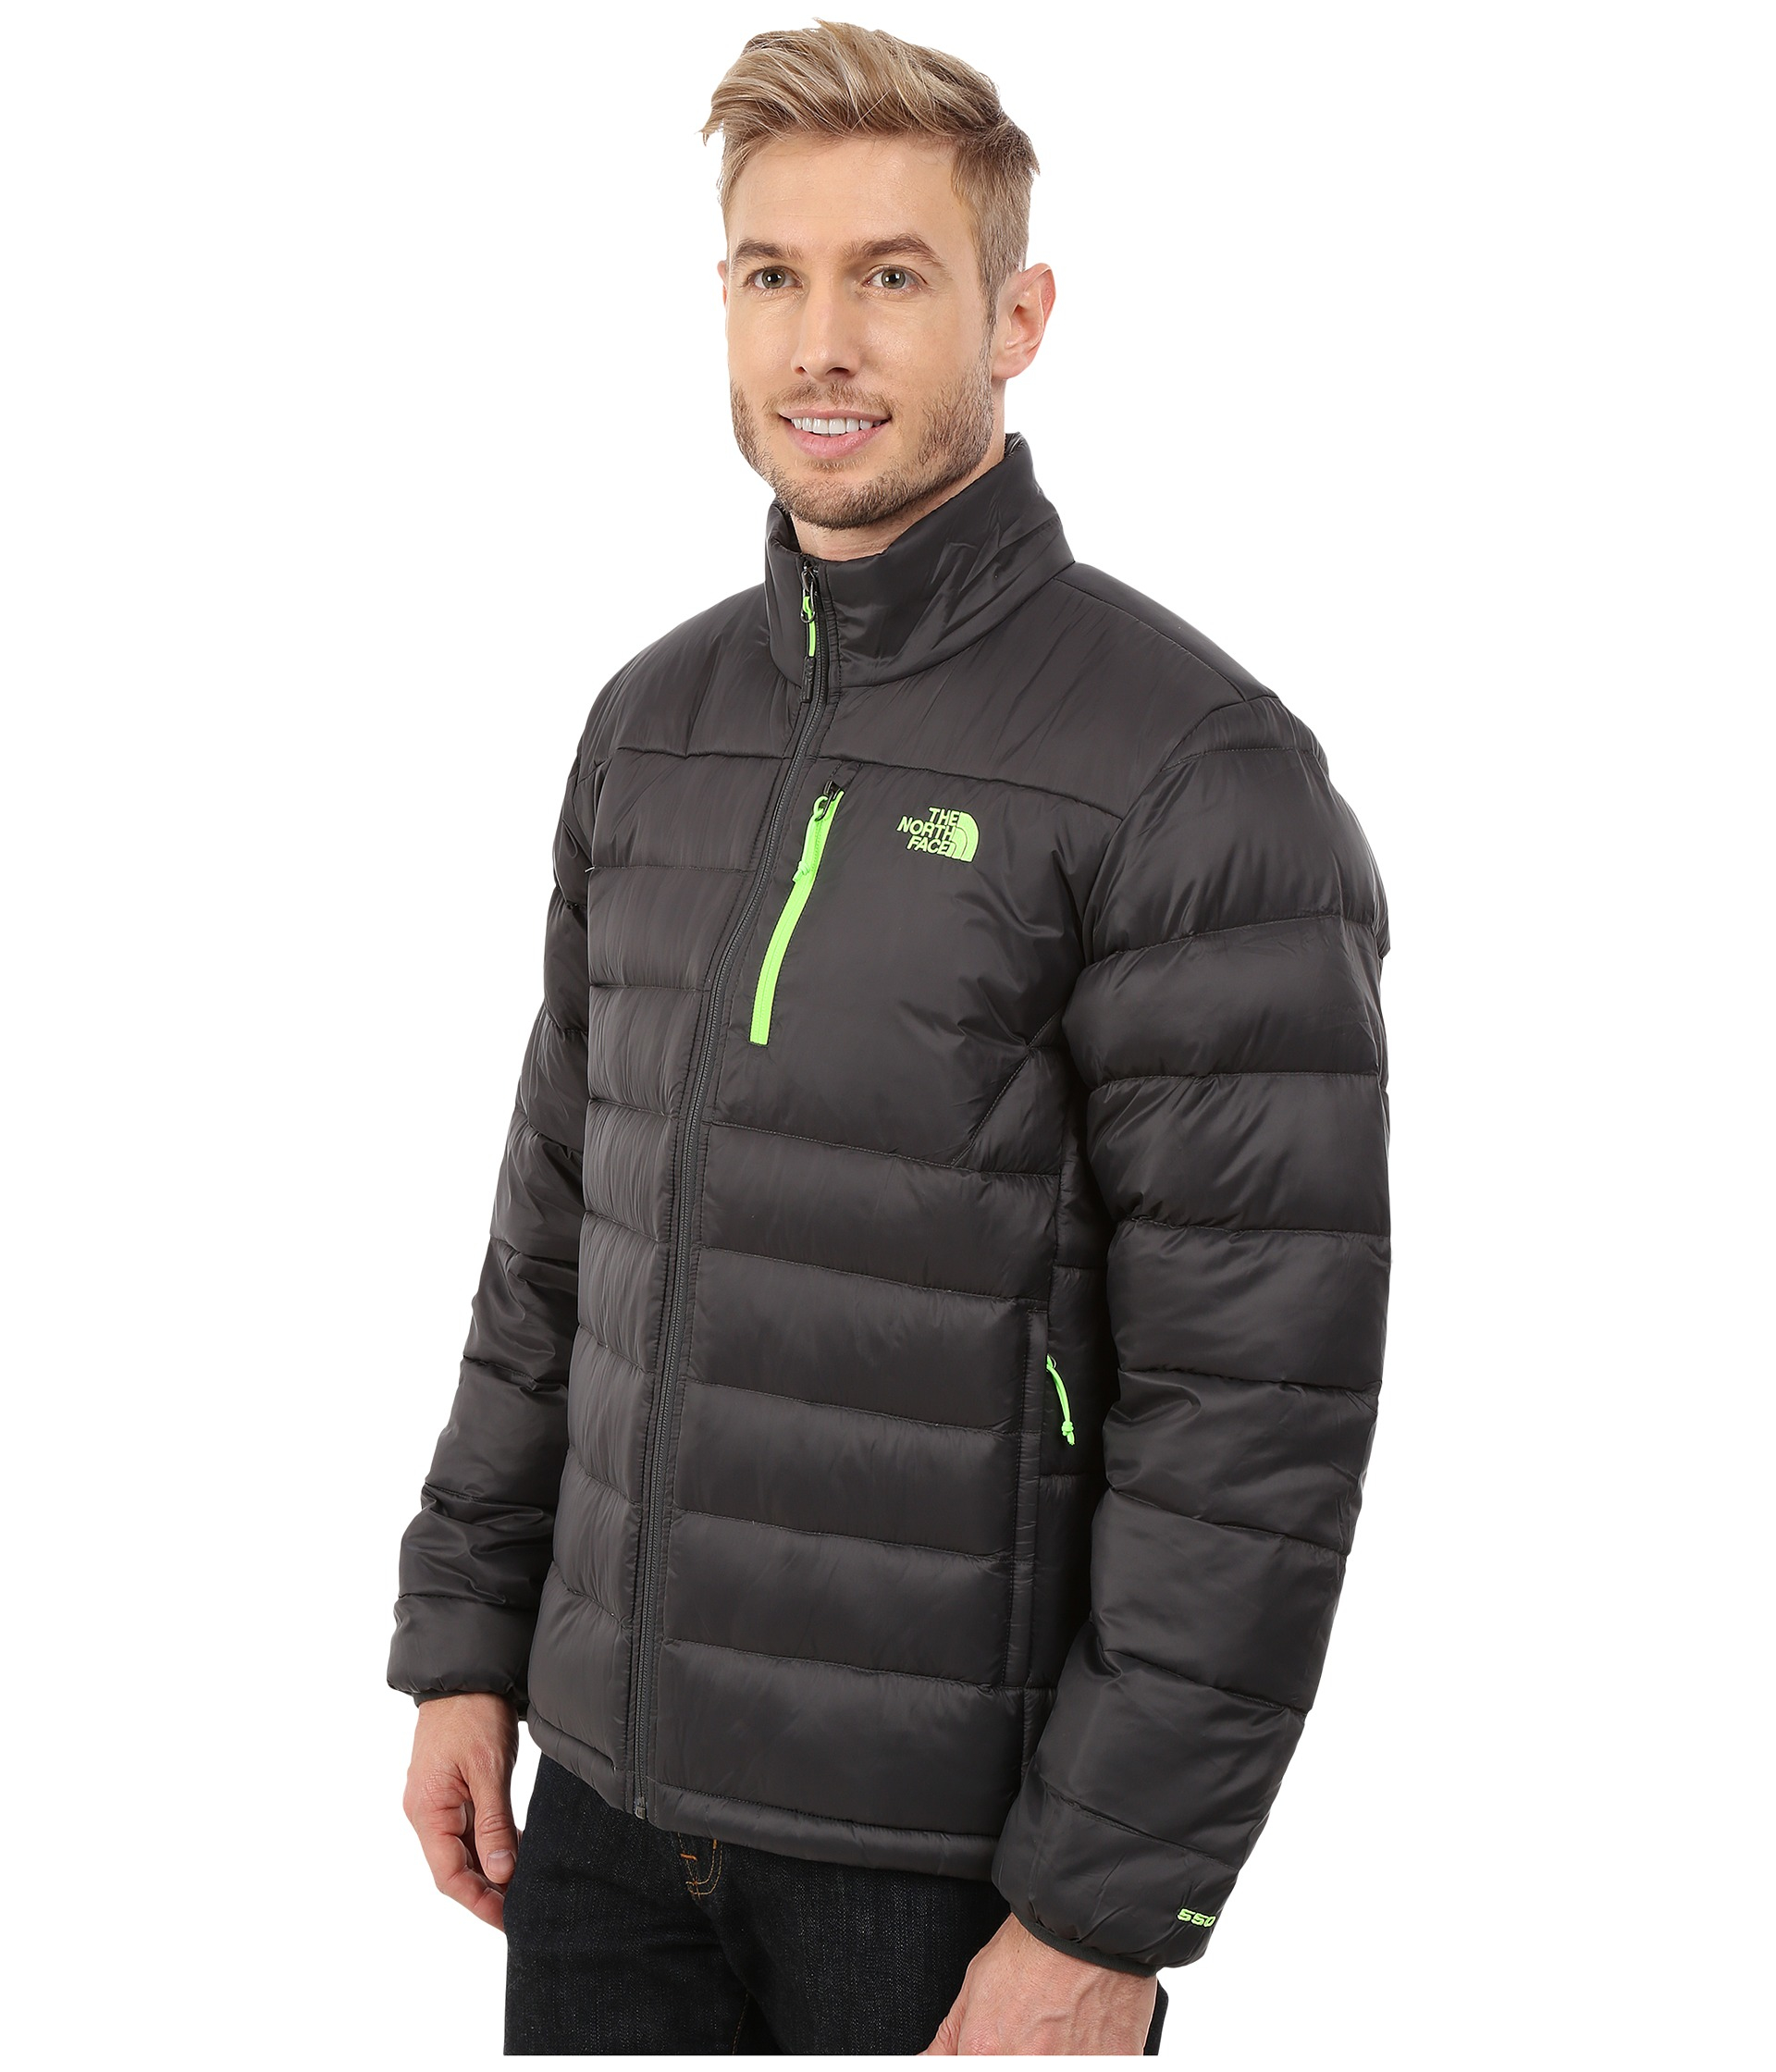 Lyst - The North Face Aconcagua Jacket in Black for Men